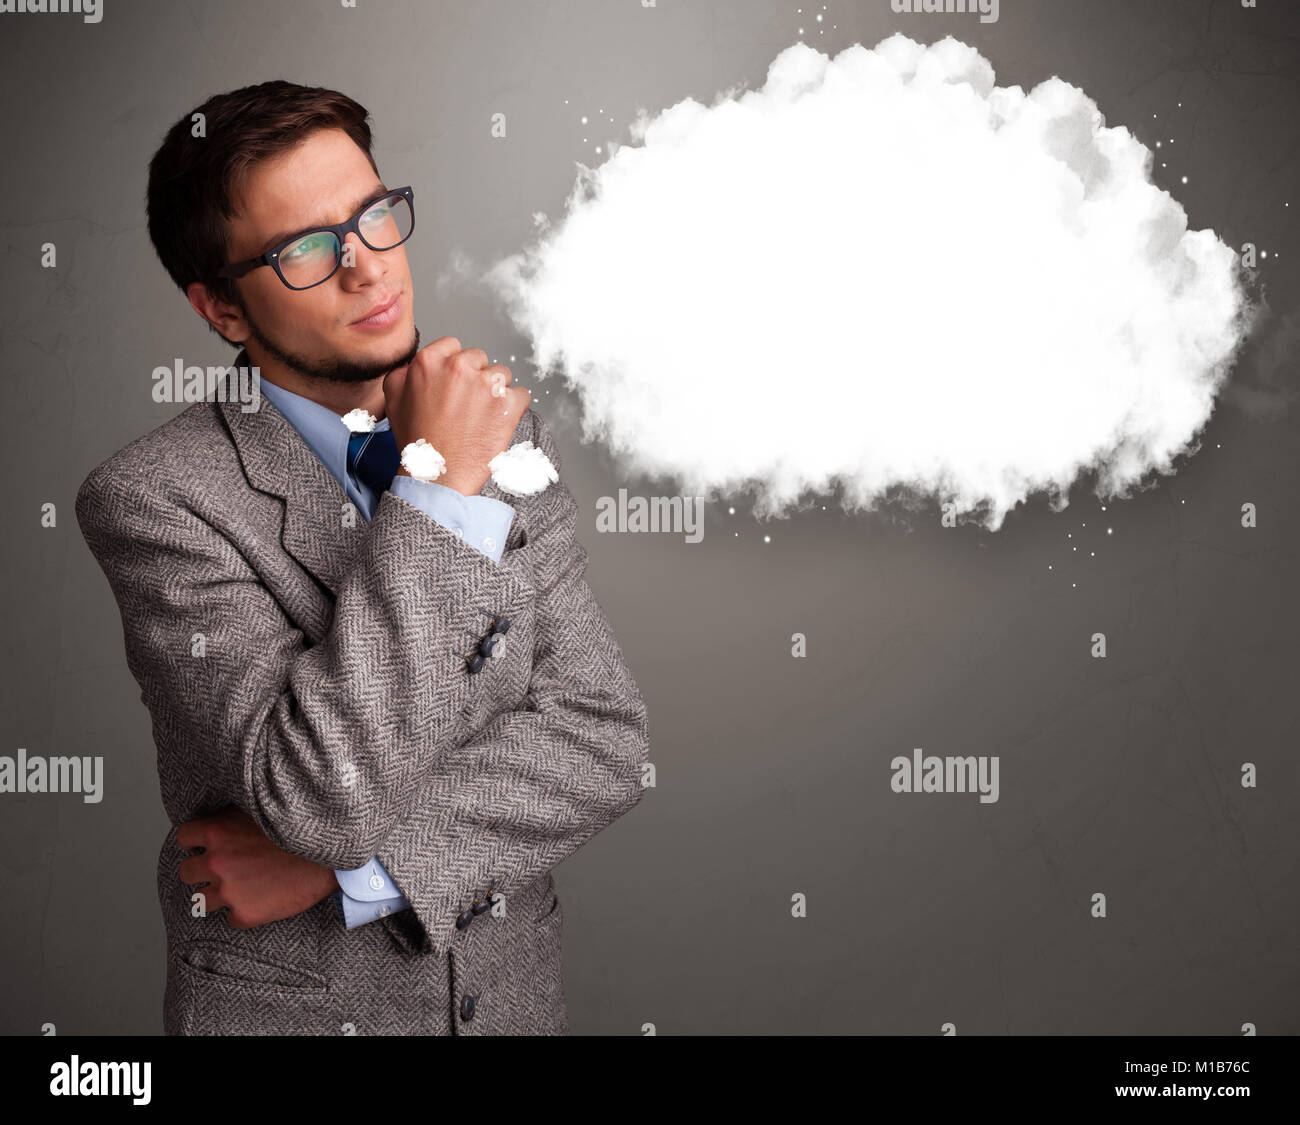 Good-looking young man thinking about cloud speech or thought bubble with copy space Stock Photo